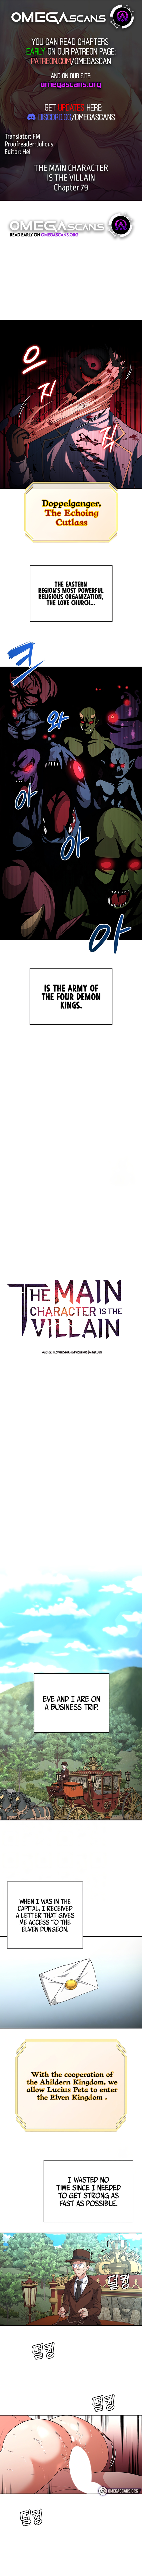 The Main Character is the Villain image